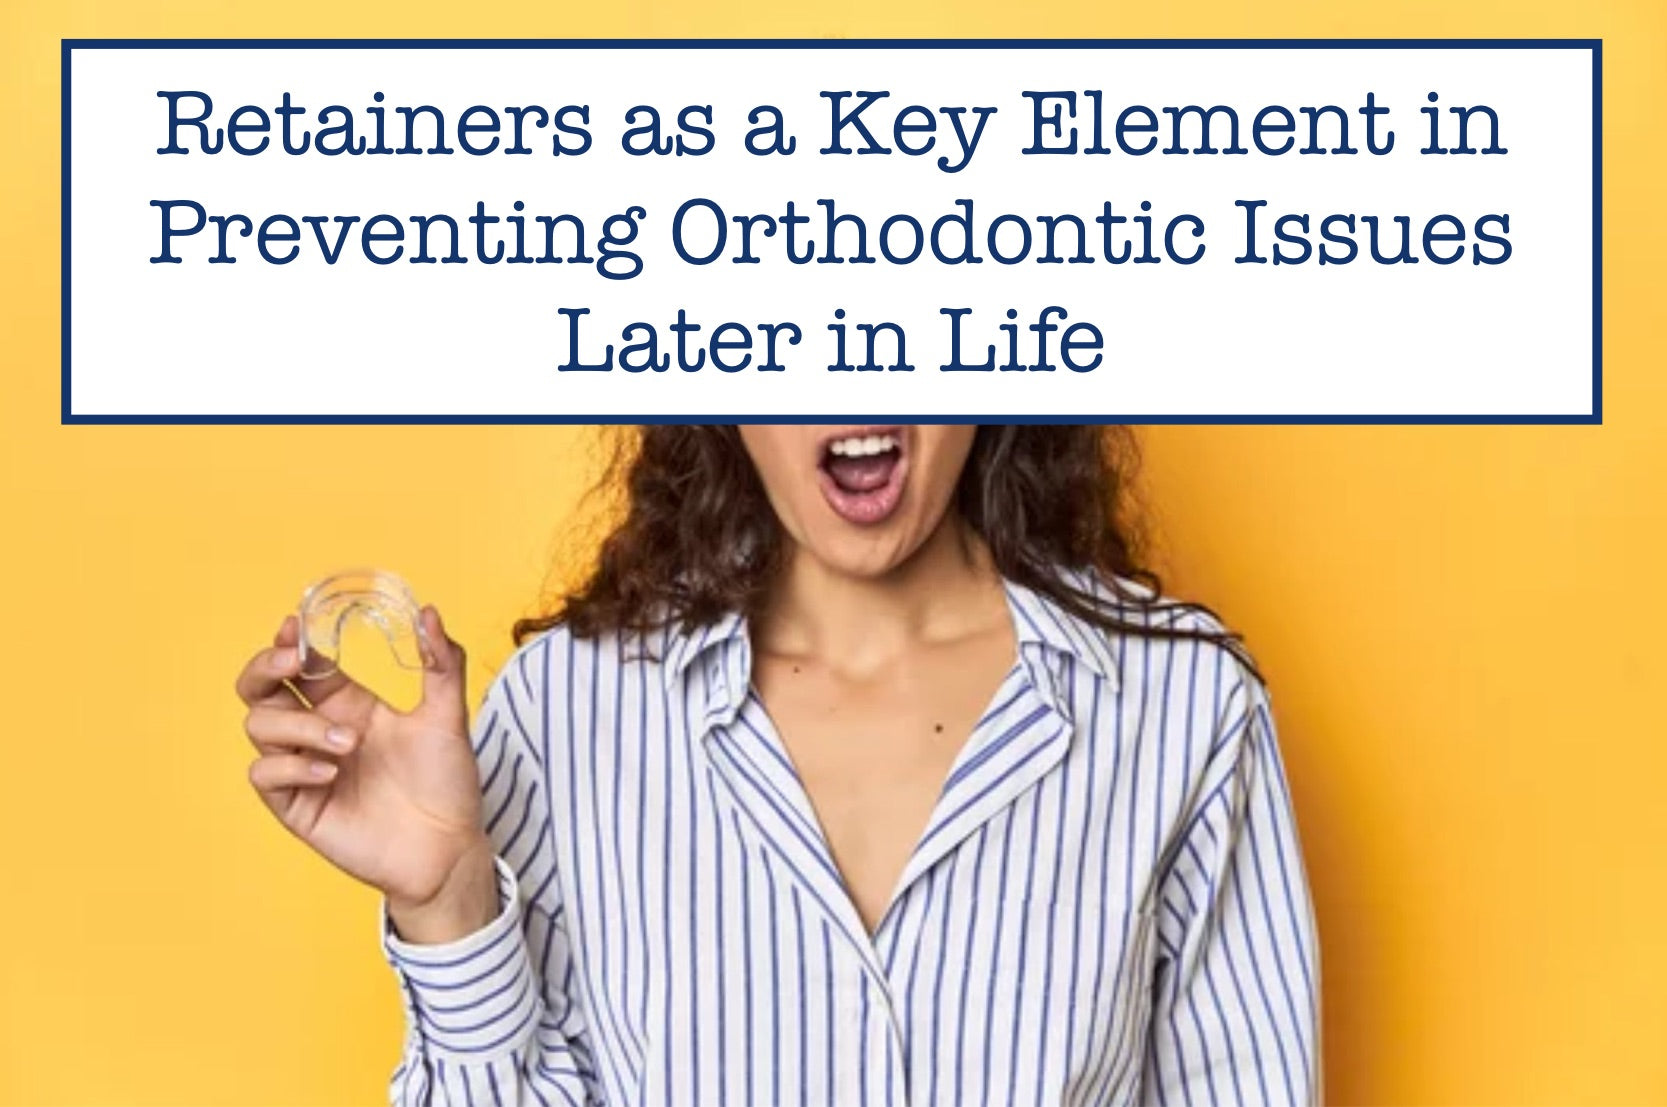 Retainers as a Key Element in Preventing Orthodontic Issues Later in Life